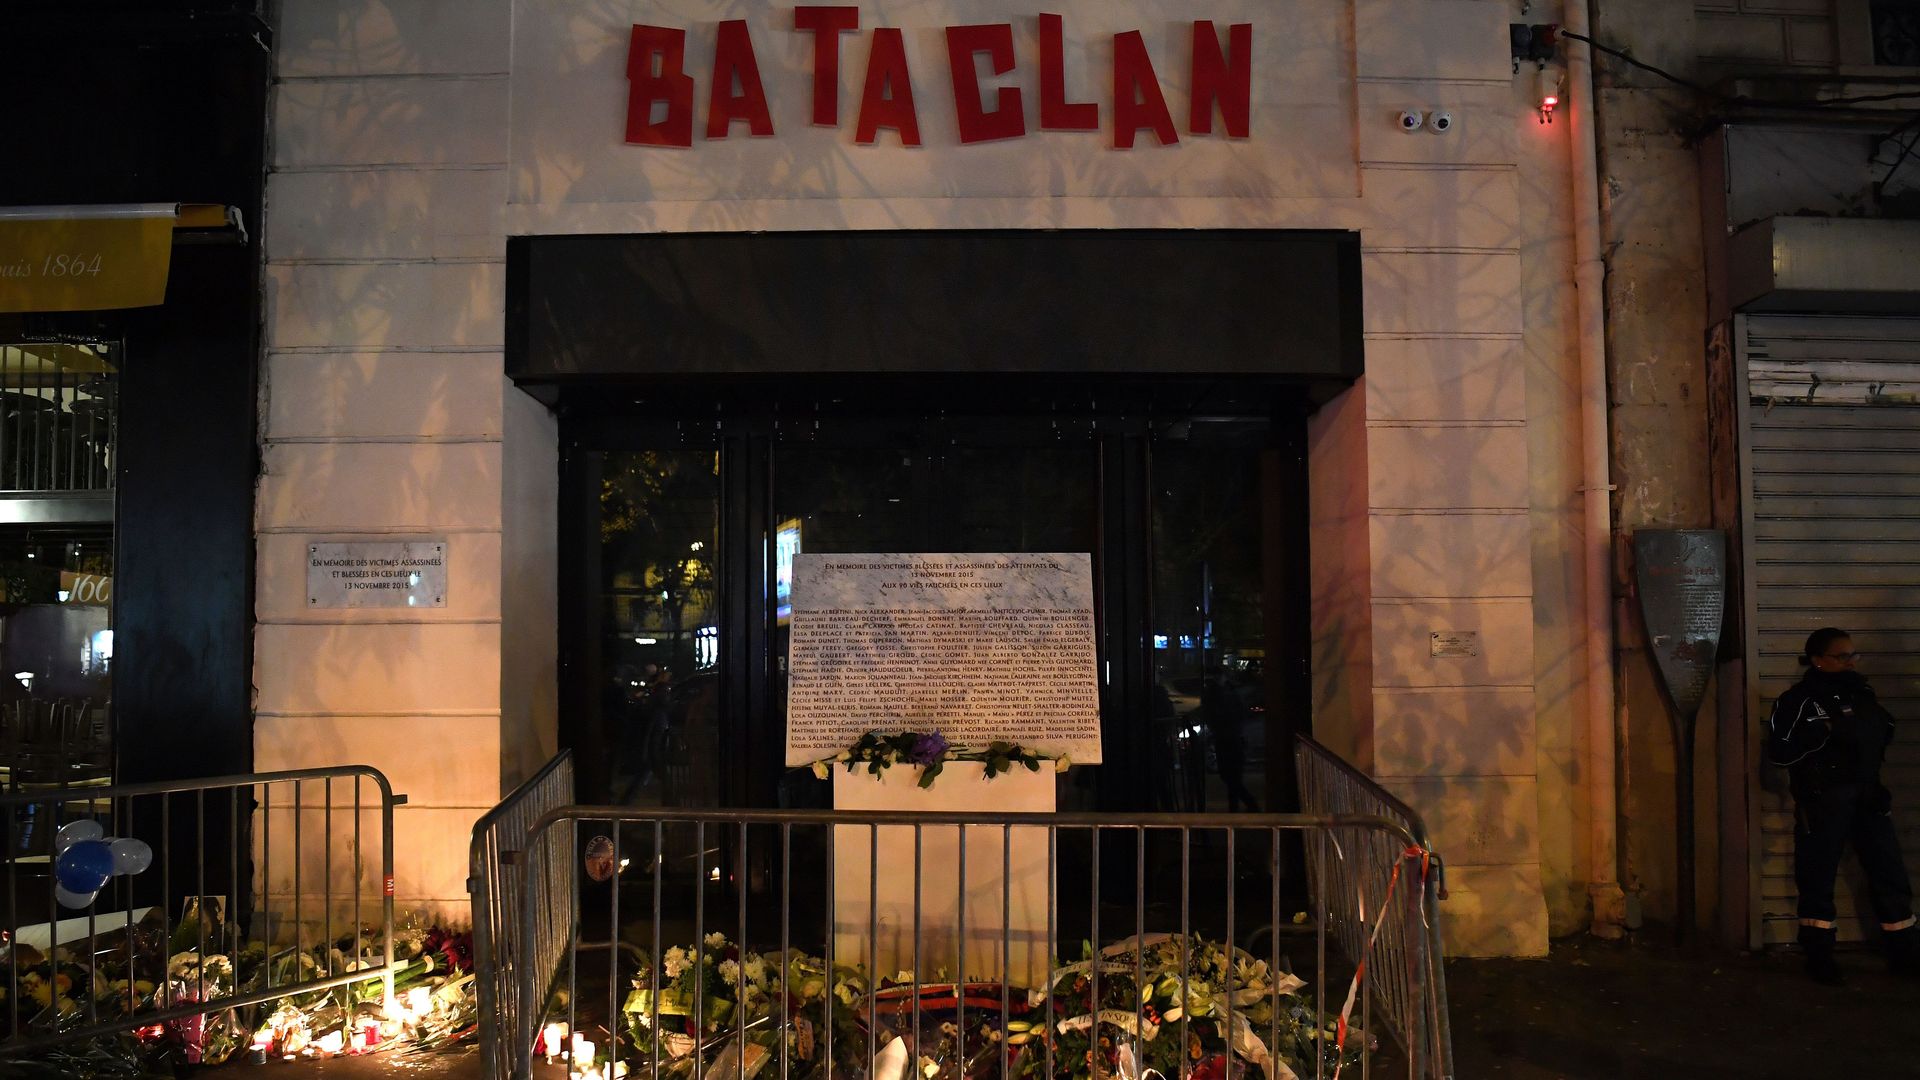 A makeshift memorial outside the commemorative plaque outside the Bataclan concert hall in tribute of the victims of the attack on the Bataclan